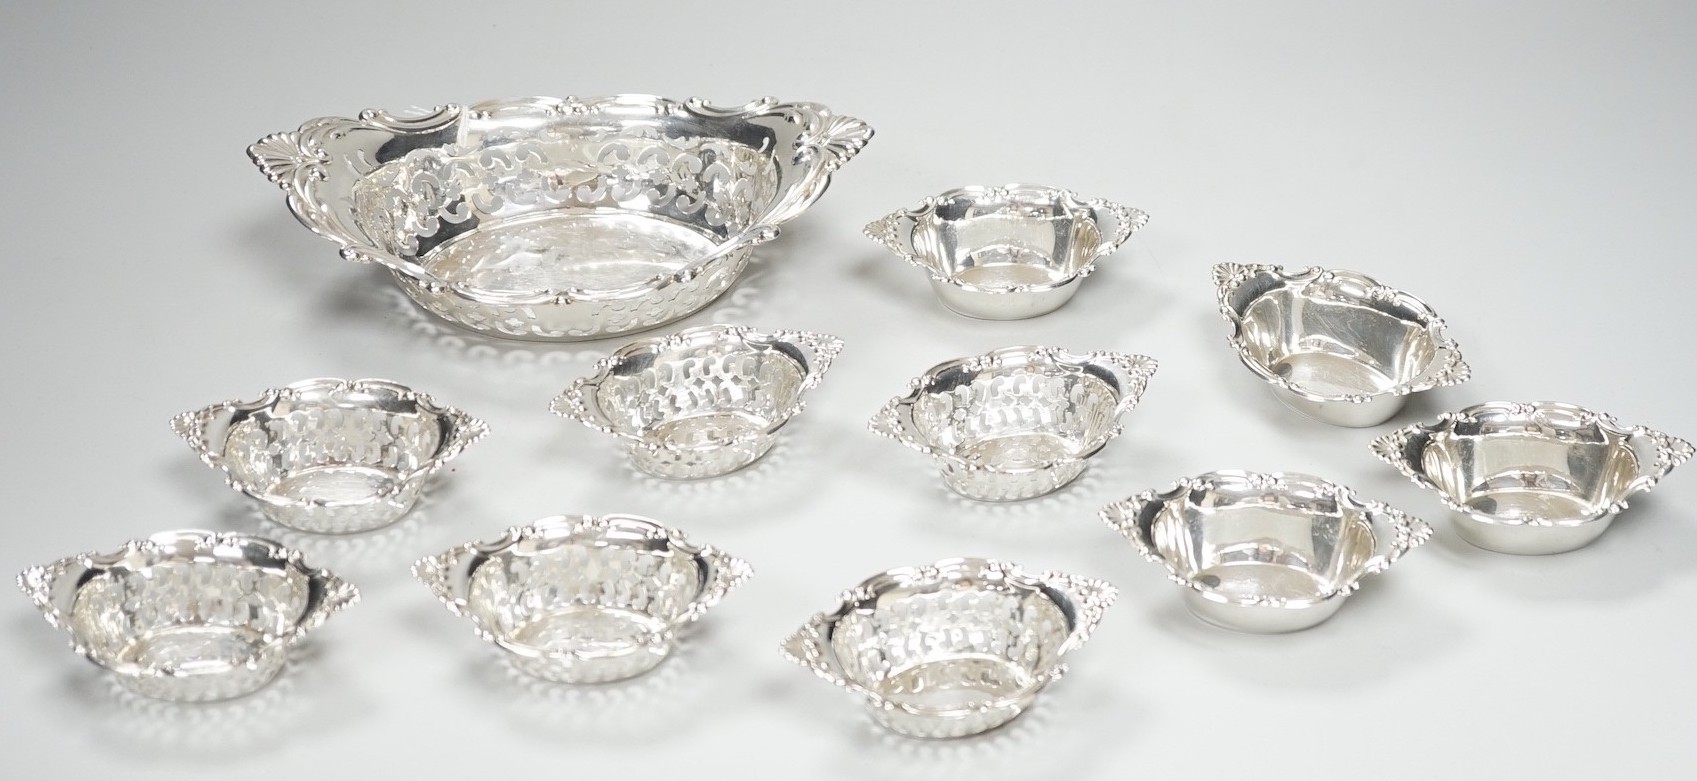 A set of ten Canadian Birks pierced sterling nut dishes, 97mm and a similar larger dish, 20.8cm, 11oz.